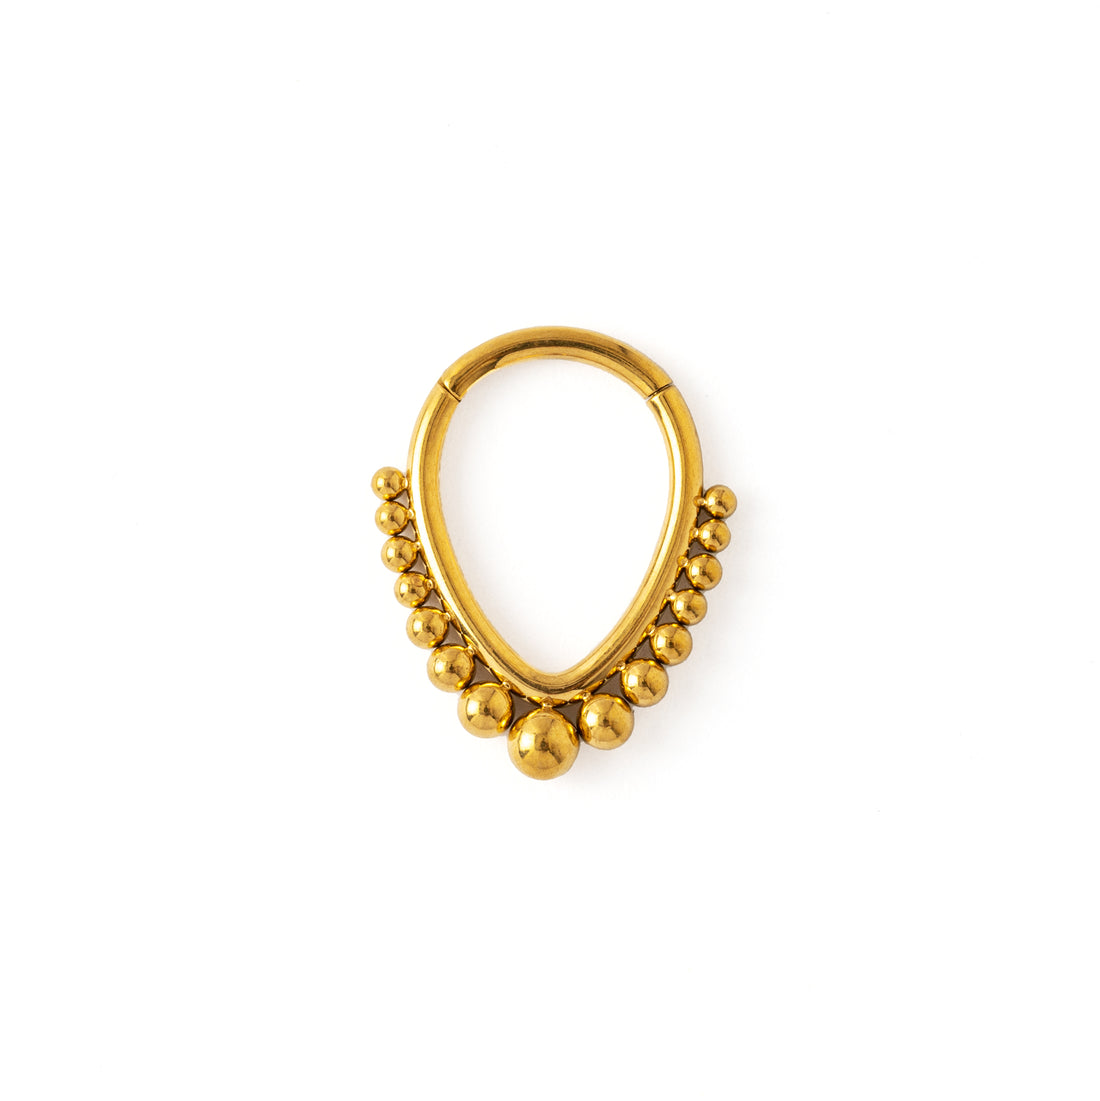 Althea Golden surgical steel Teardrop Septum Clicker ring frontal view